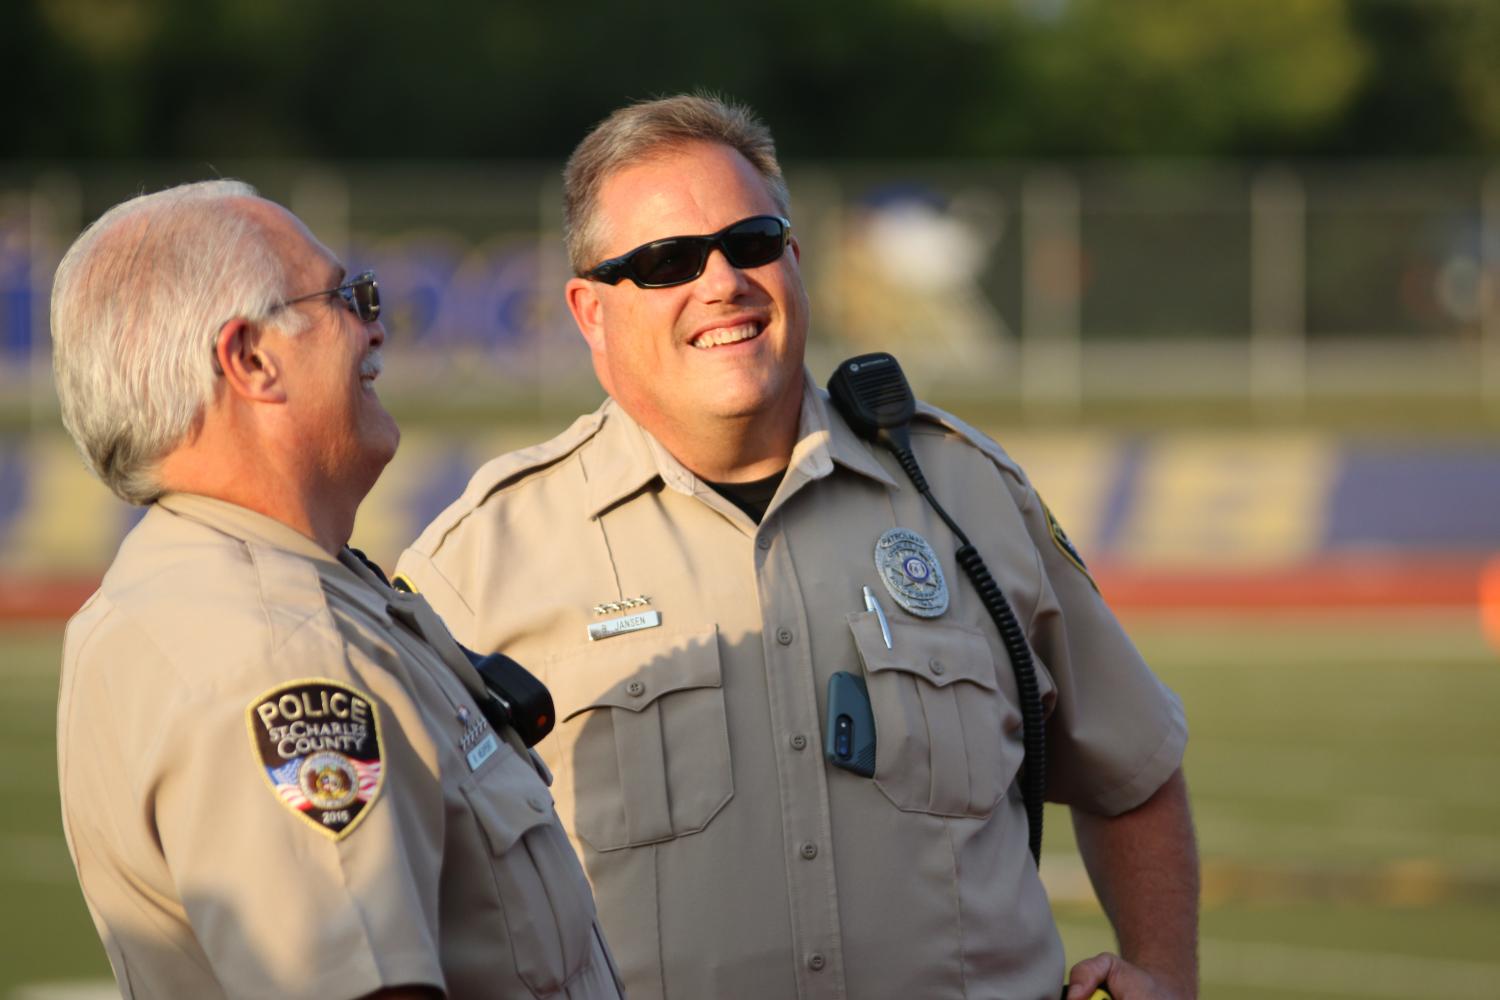 Deputy Ron Neupert and Deputy Bret Jansen accept their recognition at the annual First Responders football game Friday, Sept. 8.  The entire fan section gave the officers a standing ovation while wearing Red, White, and Blue and creating our country’s flag. 